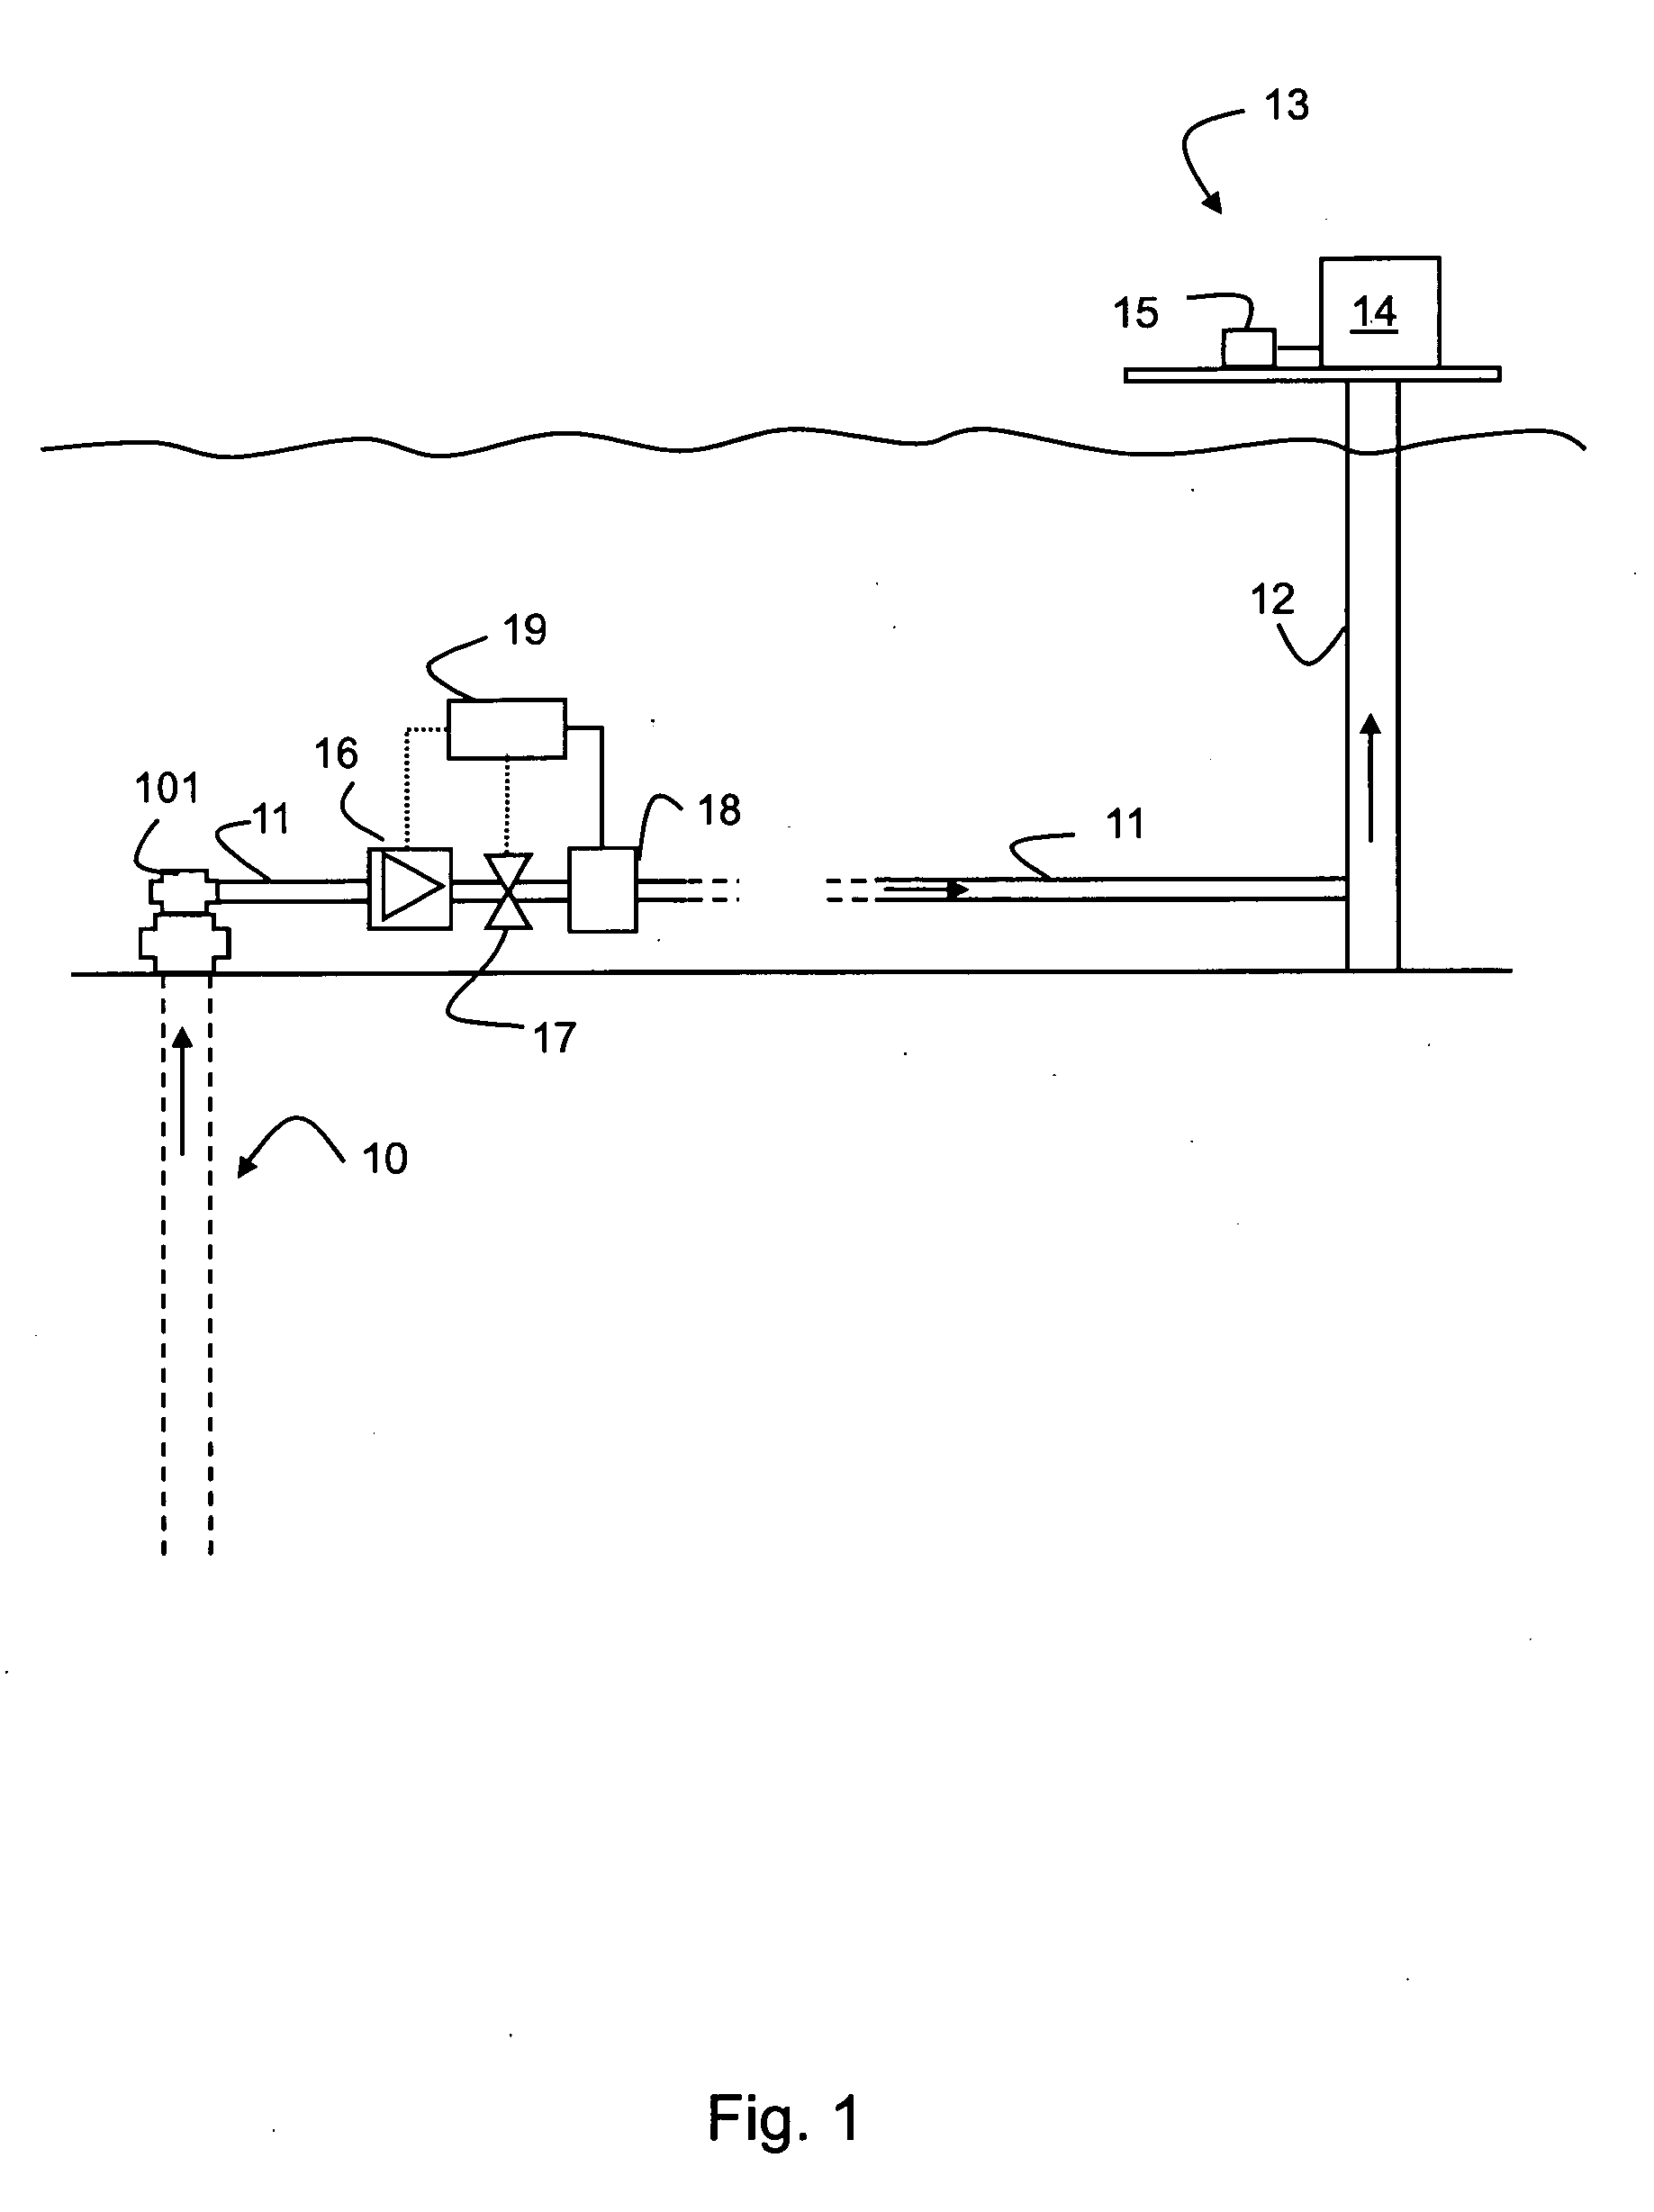 Method and apparatus for controlling fluctuations in multiphase flow production lines